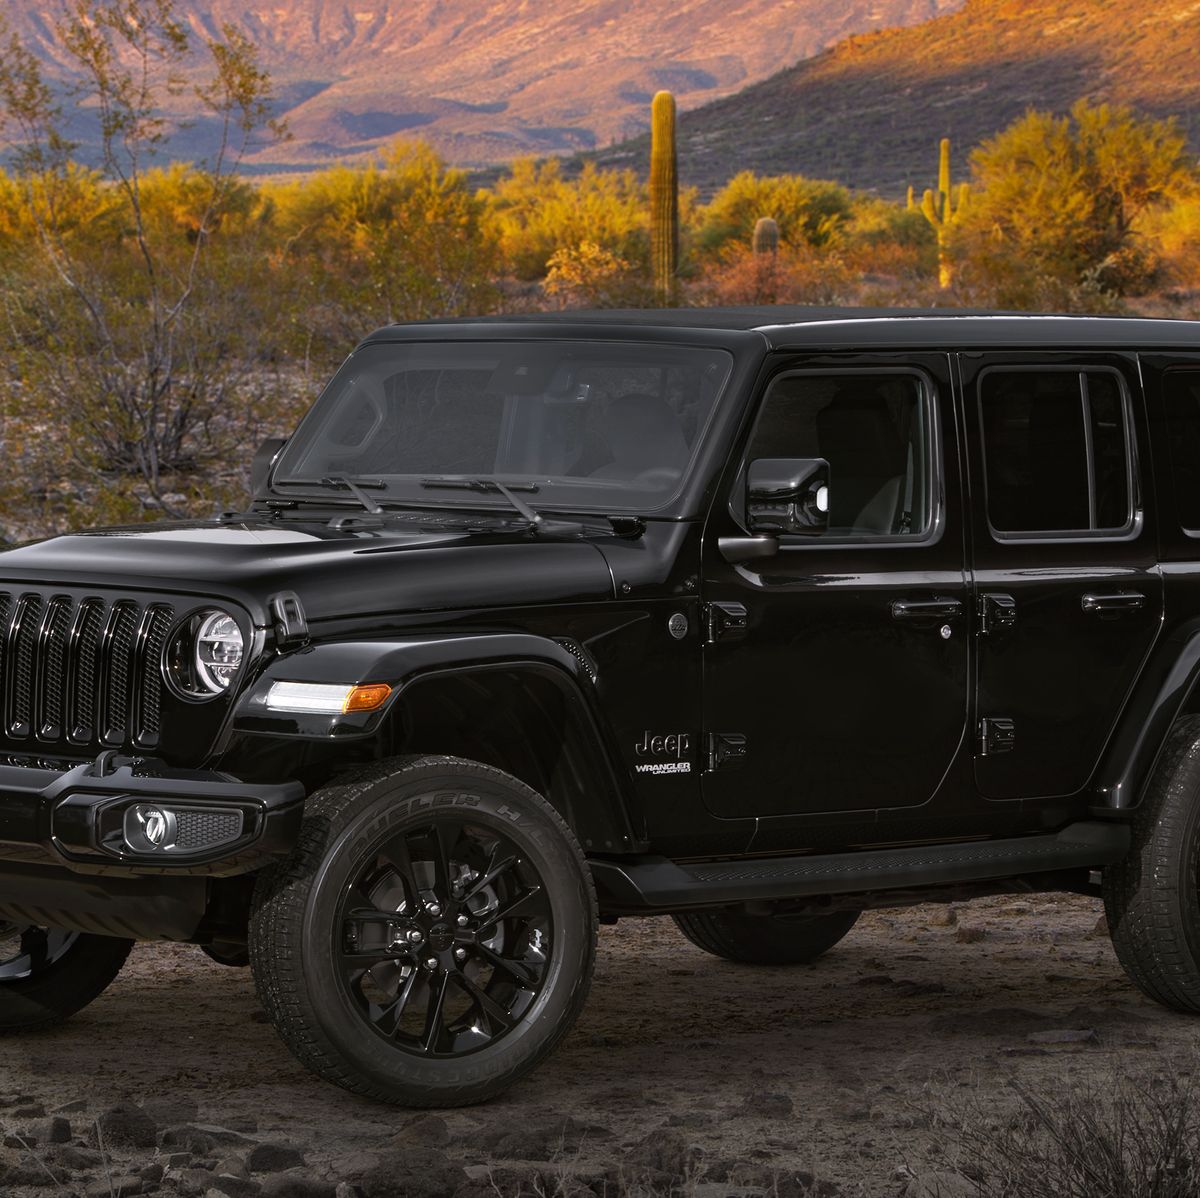 Gallery: Jeep Gladiator and Wrangler High Altitude